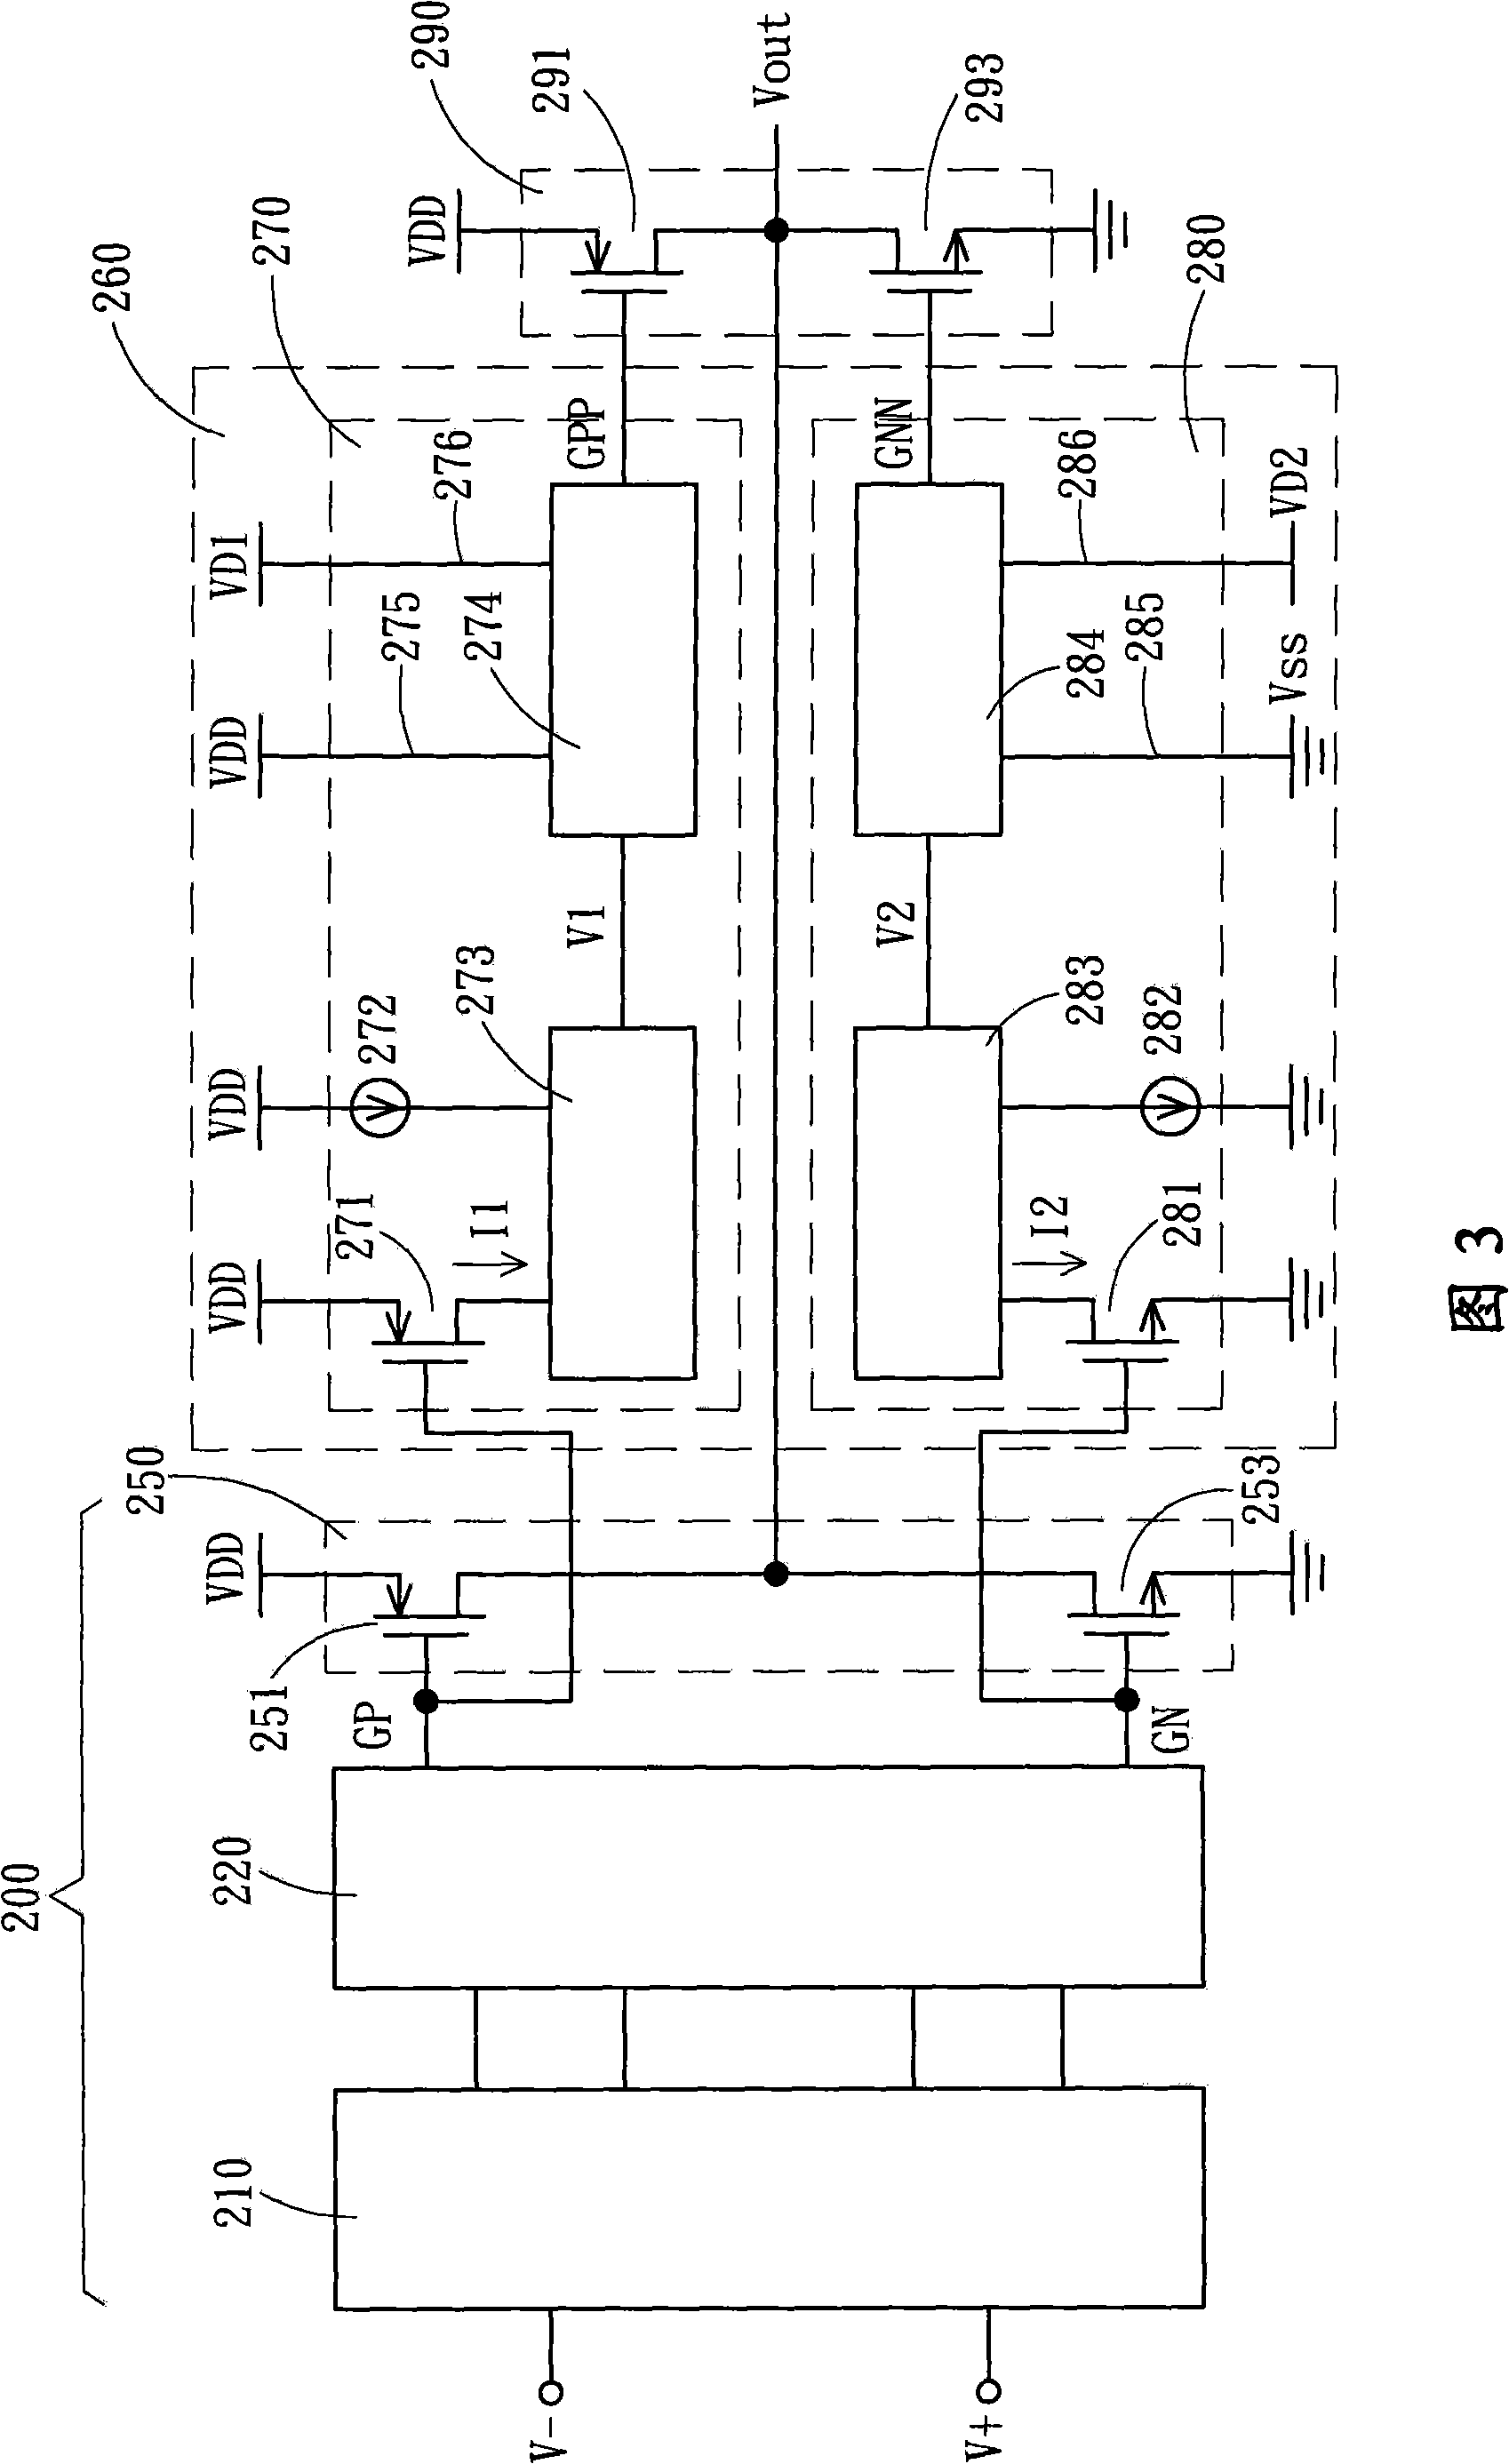 Apparatus for increasing turn rate of operational amplifier